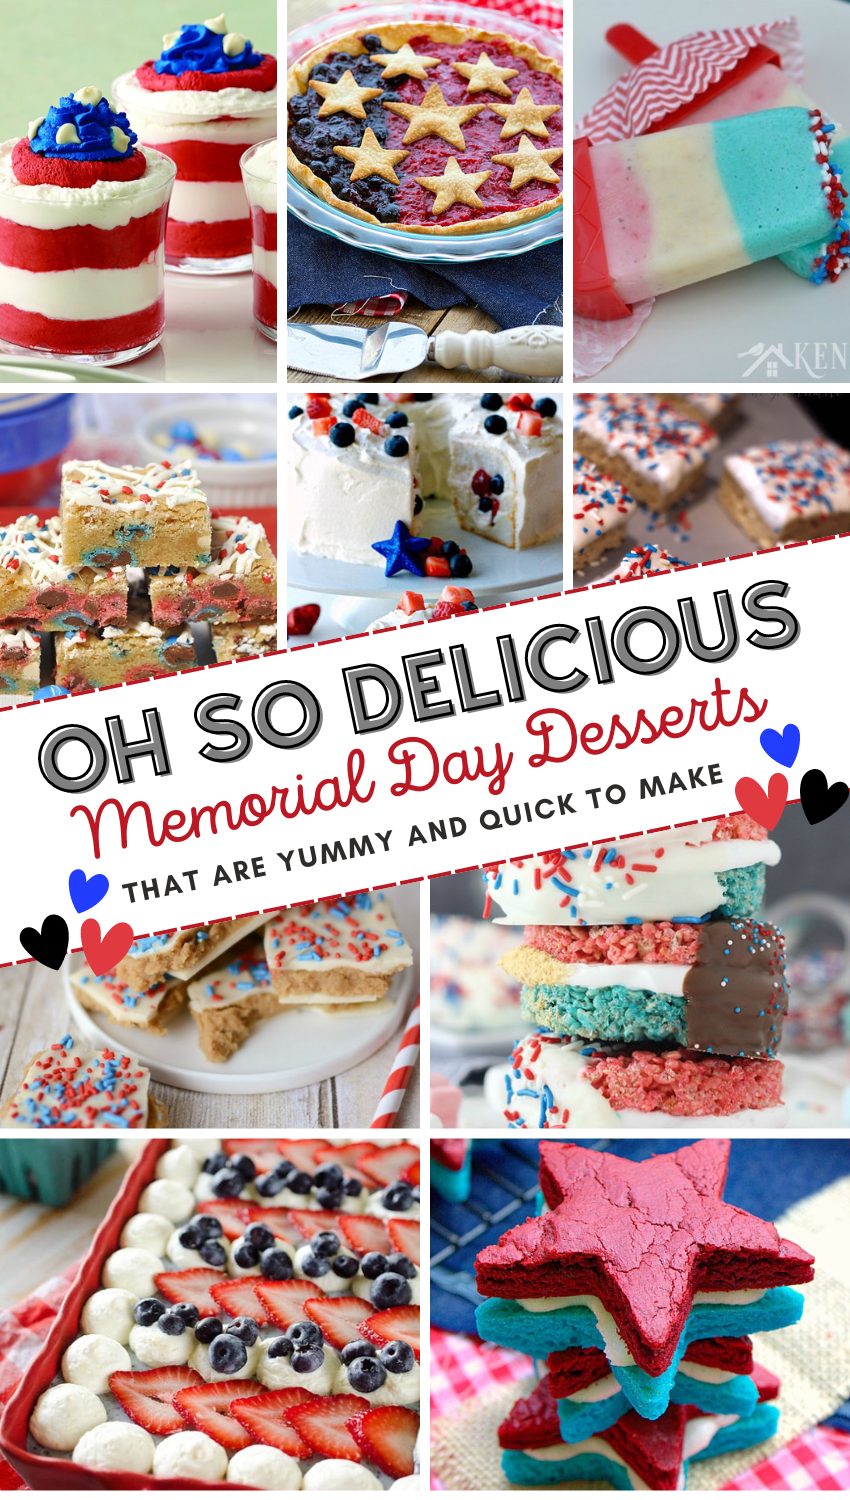 Memorial Day Desserts that are Red, White and Blue